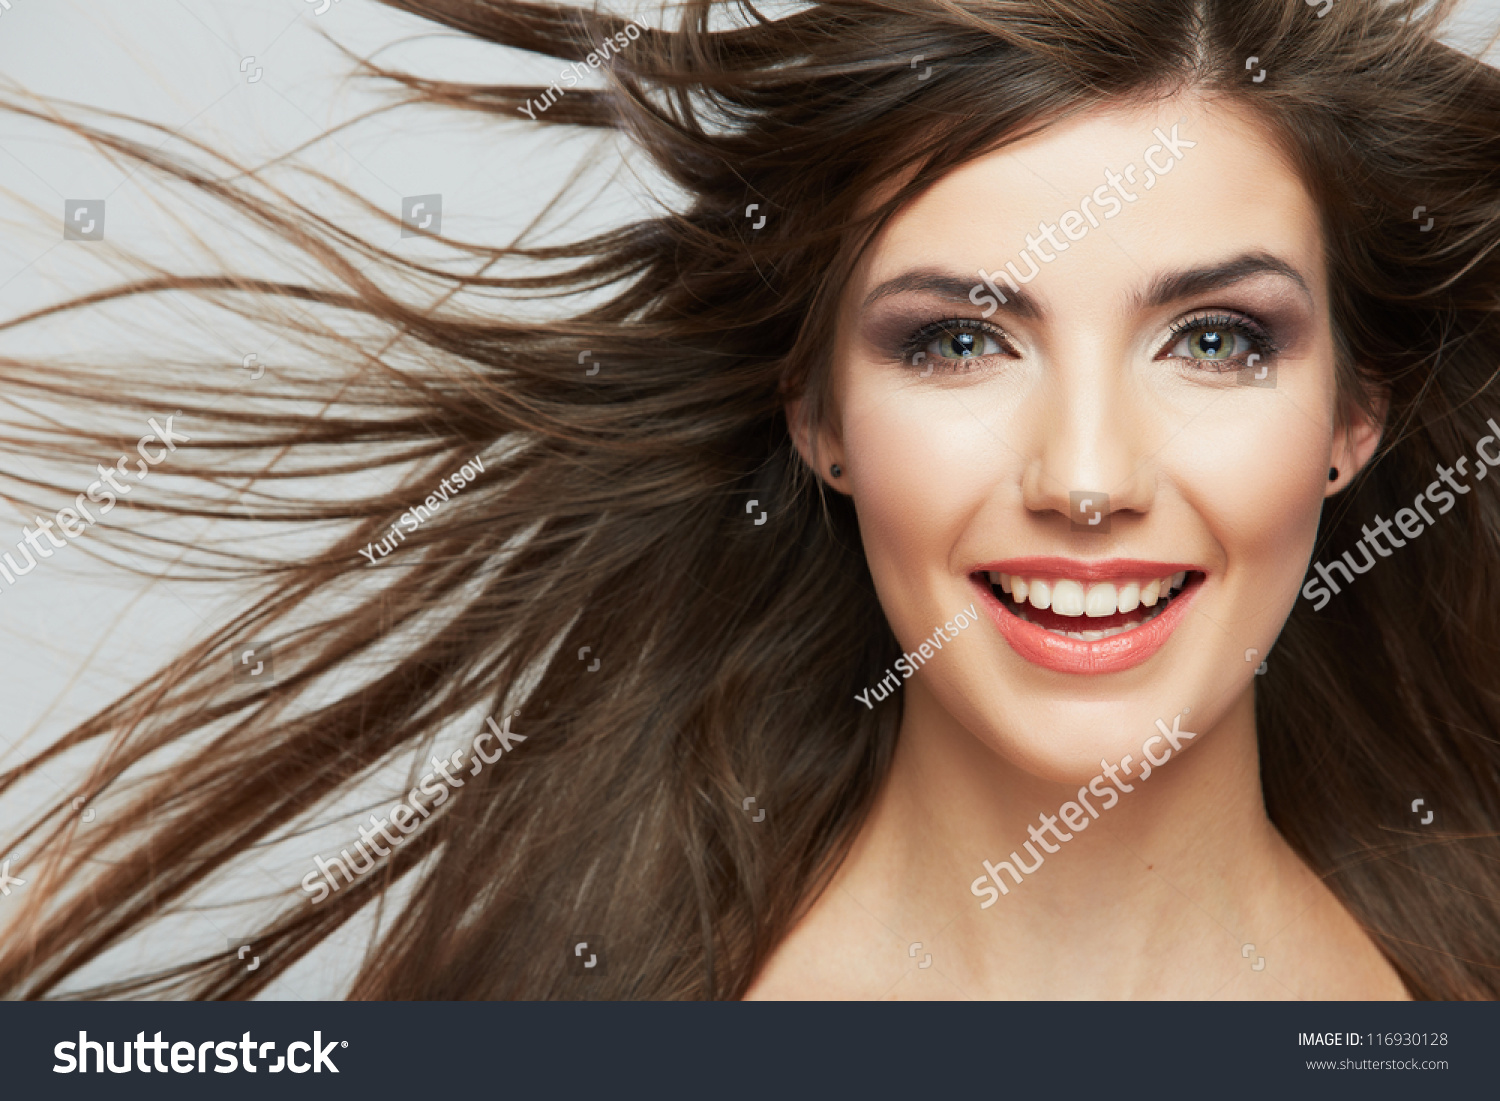 Woman Face Hair Motion On White Stock Photo 116930128 Shutterstock